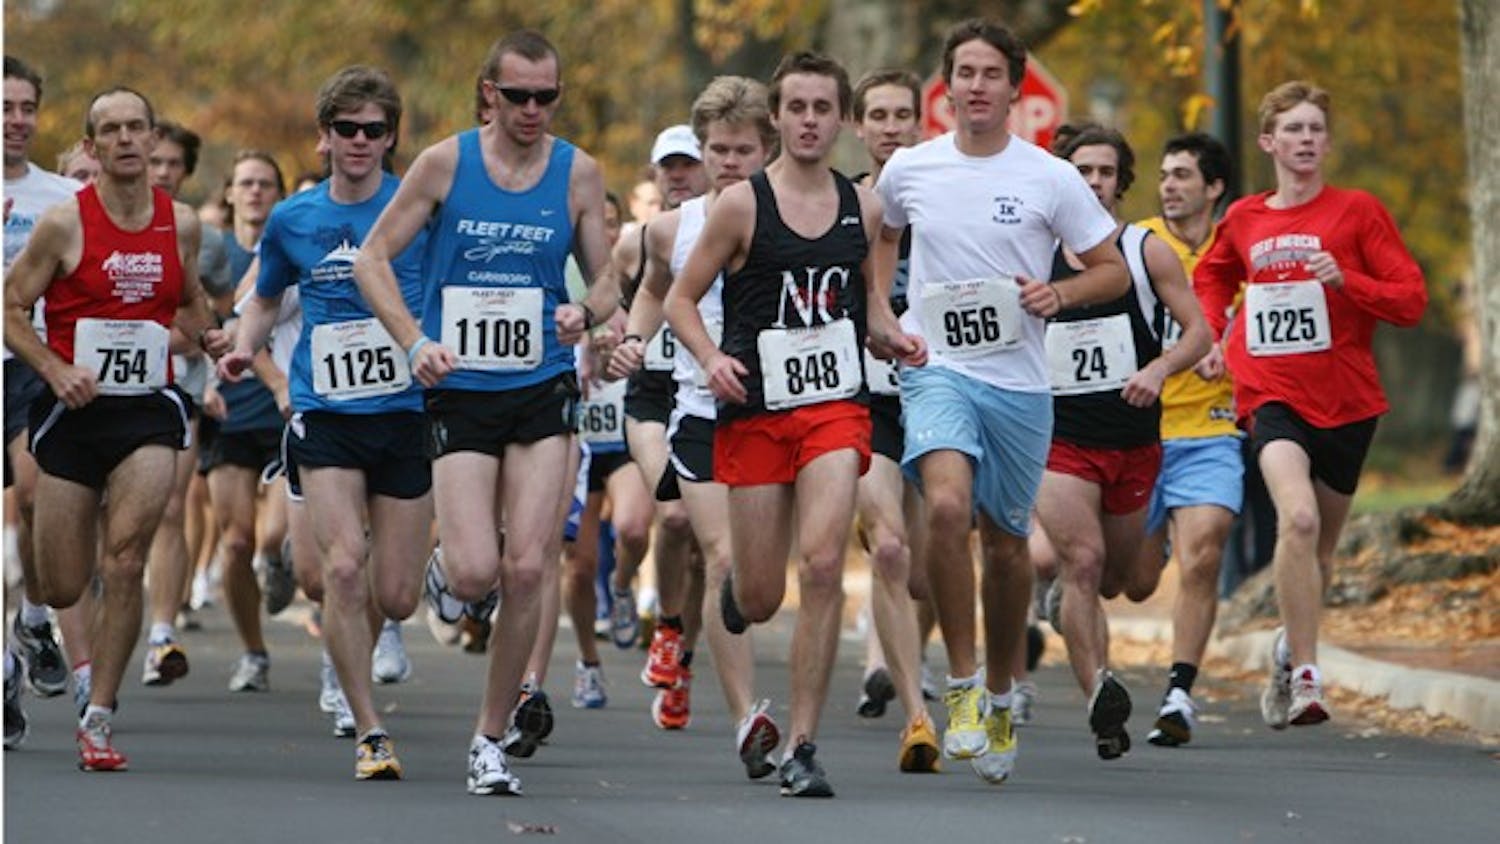 Participants in the 2009 Eve Carson Memorial 5k take off from the start line.  This year’s race through campus begins on Saturday at 10 am. 